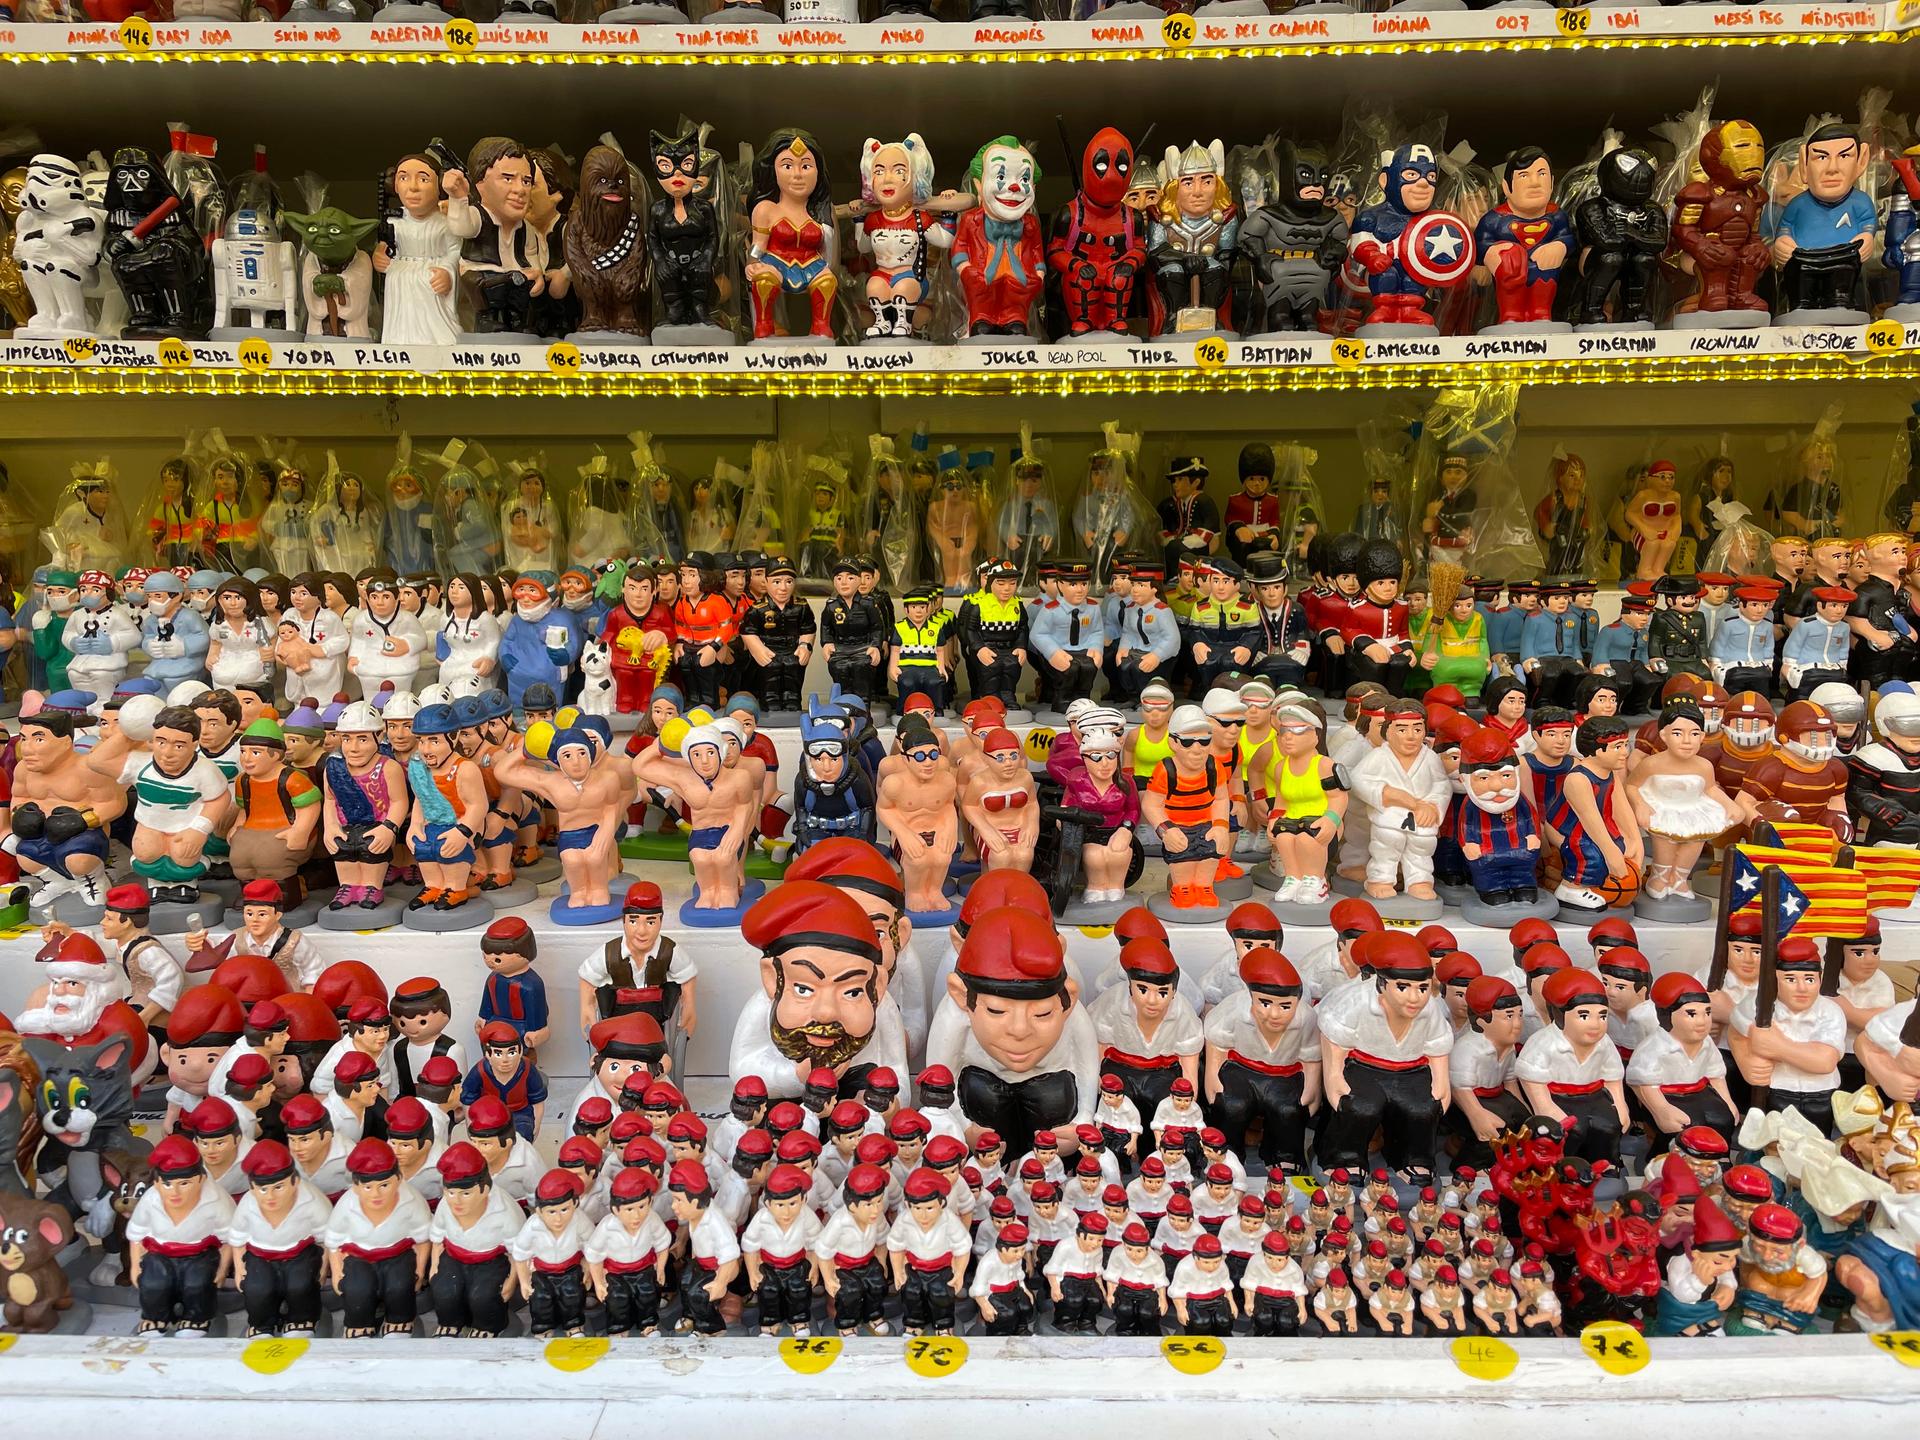 A Caganer, which means 